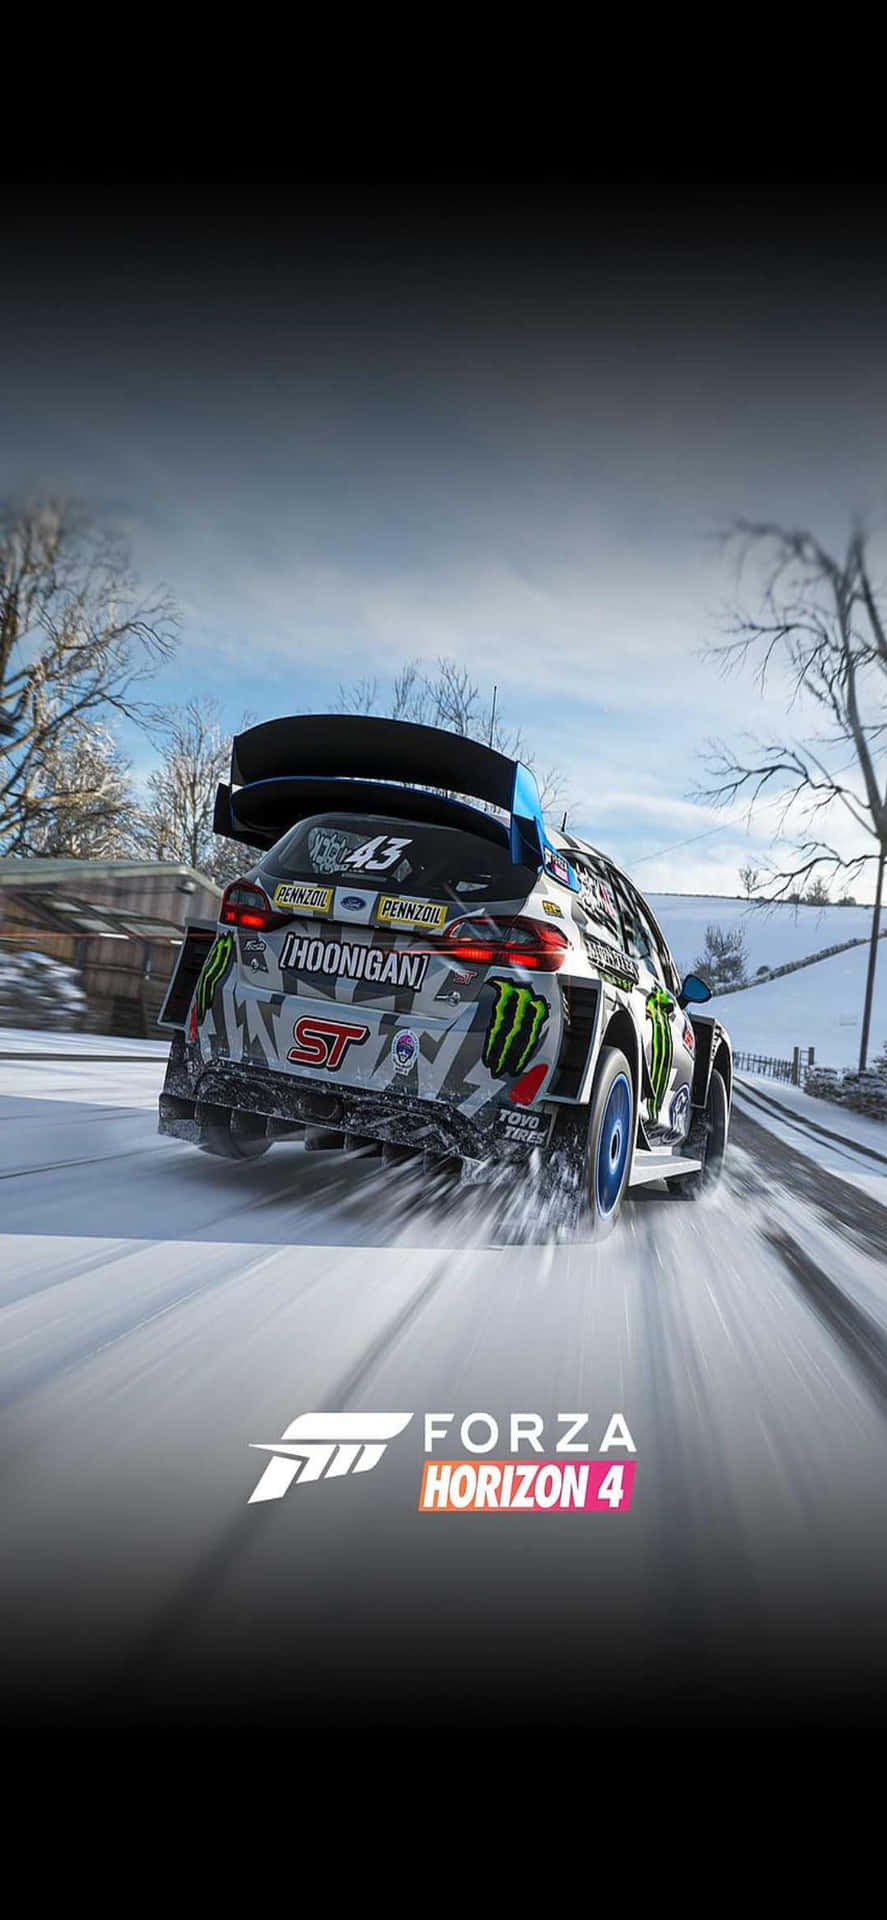 Get in the Driver's Seat with iPhone Xs and Forza Horizon 4